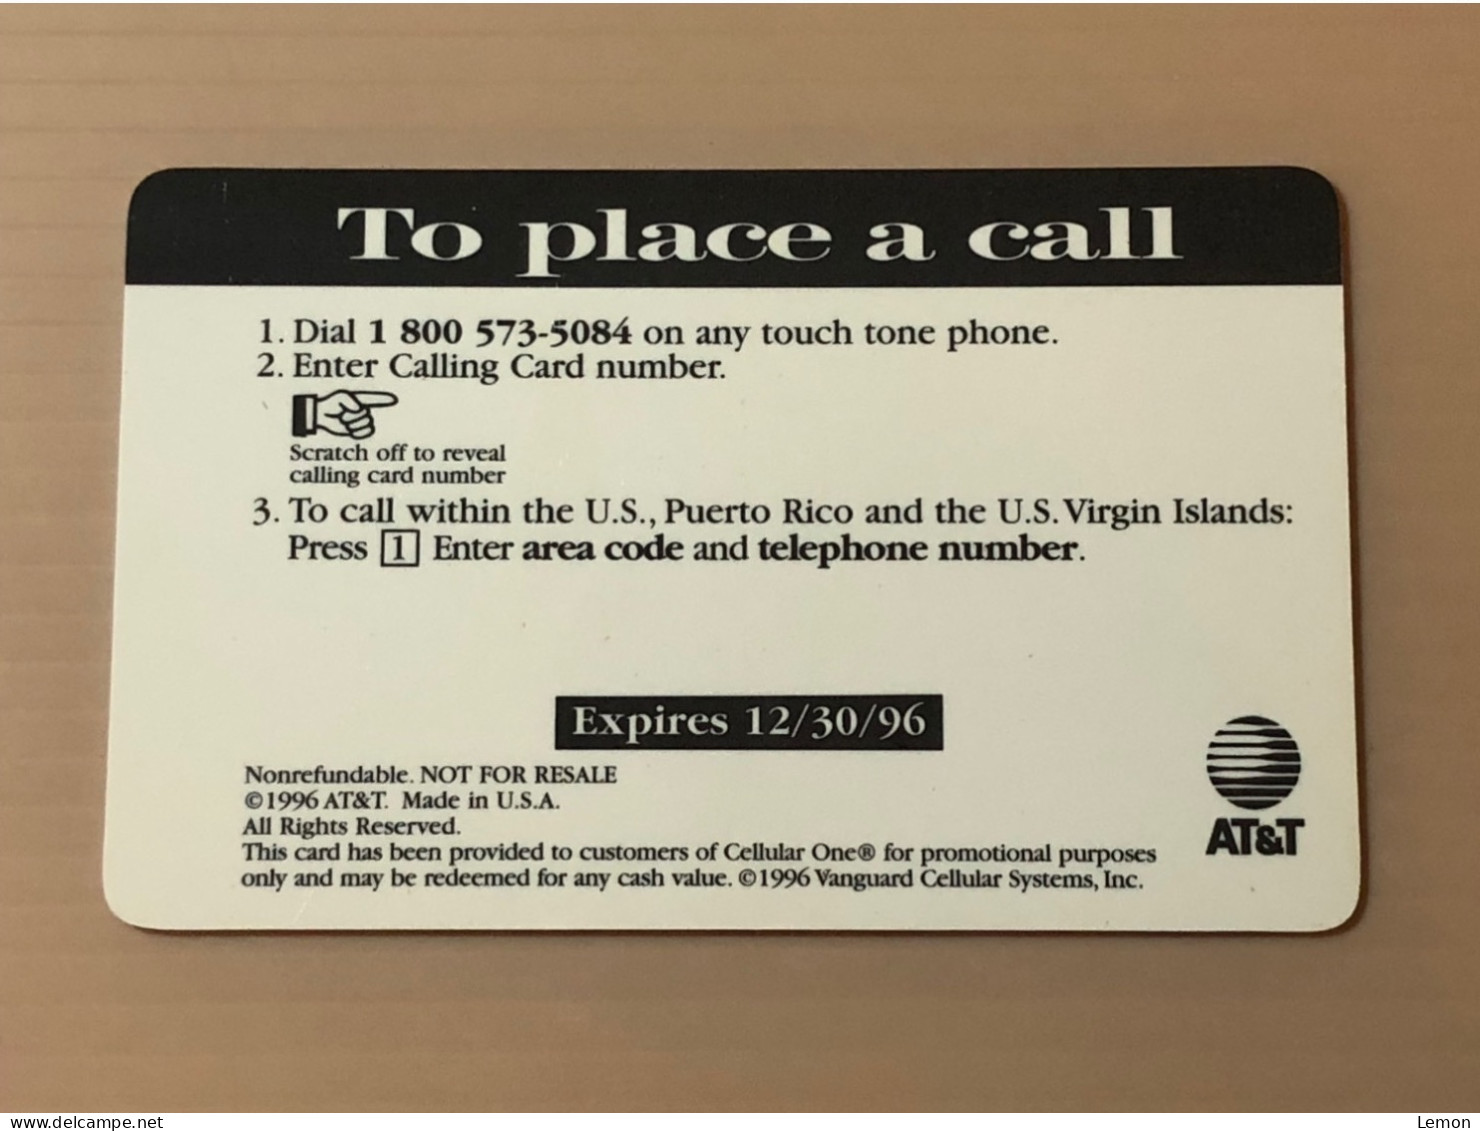 Mint USA UNITED STATES America Prepaid Telecard Phonecard, AT&T 90 CELLULAR ONE SAMPLE CARD, Set Of 1 Mint Card - Colecciones